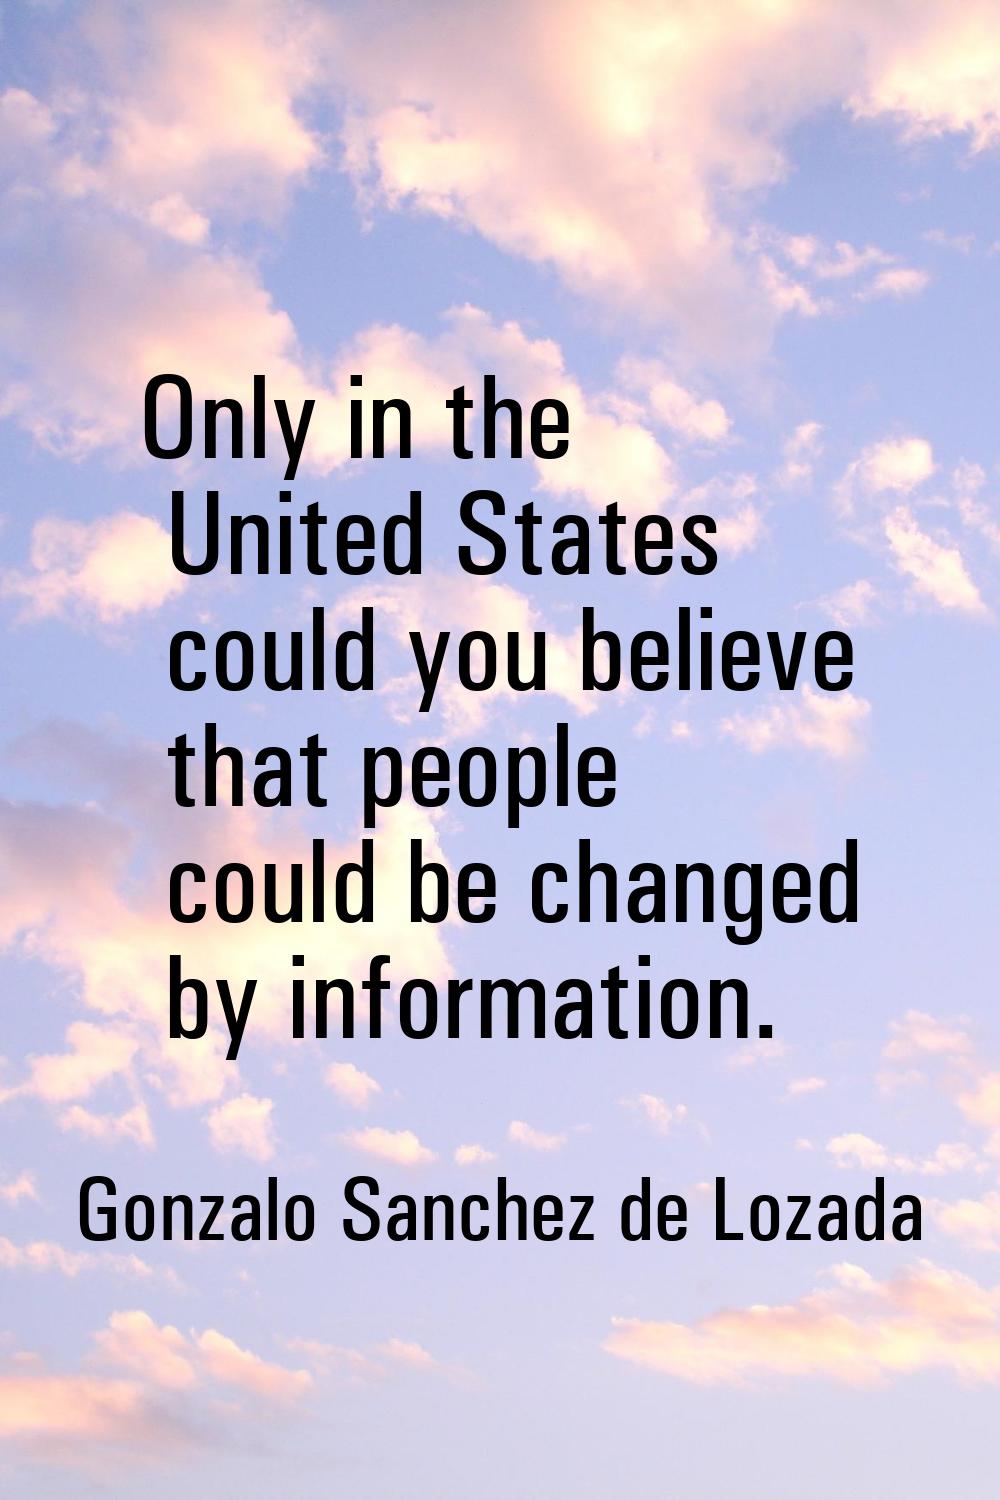 Only in the United States could you believe that people could be changed by information.